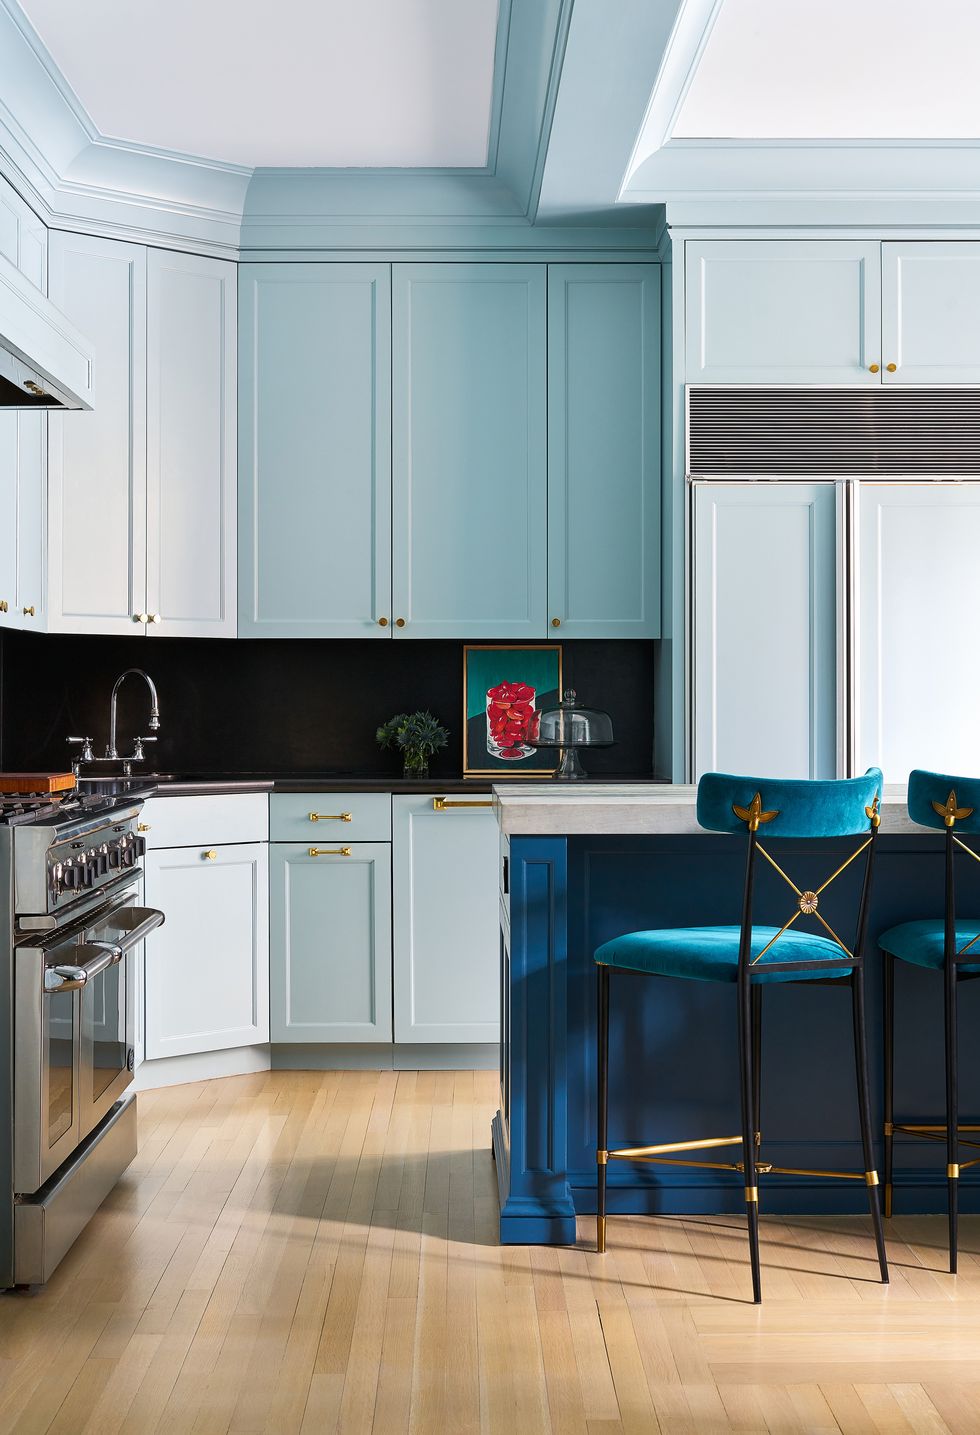 75 Beautiful Traditional Grey and Teal Kitchen Ideas and Designs